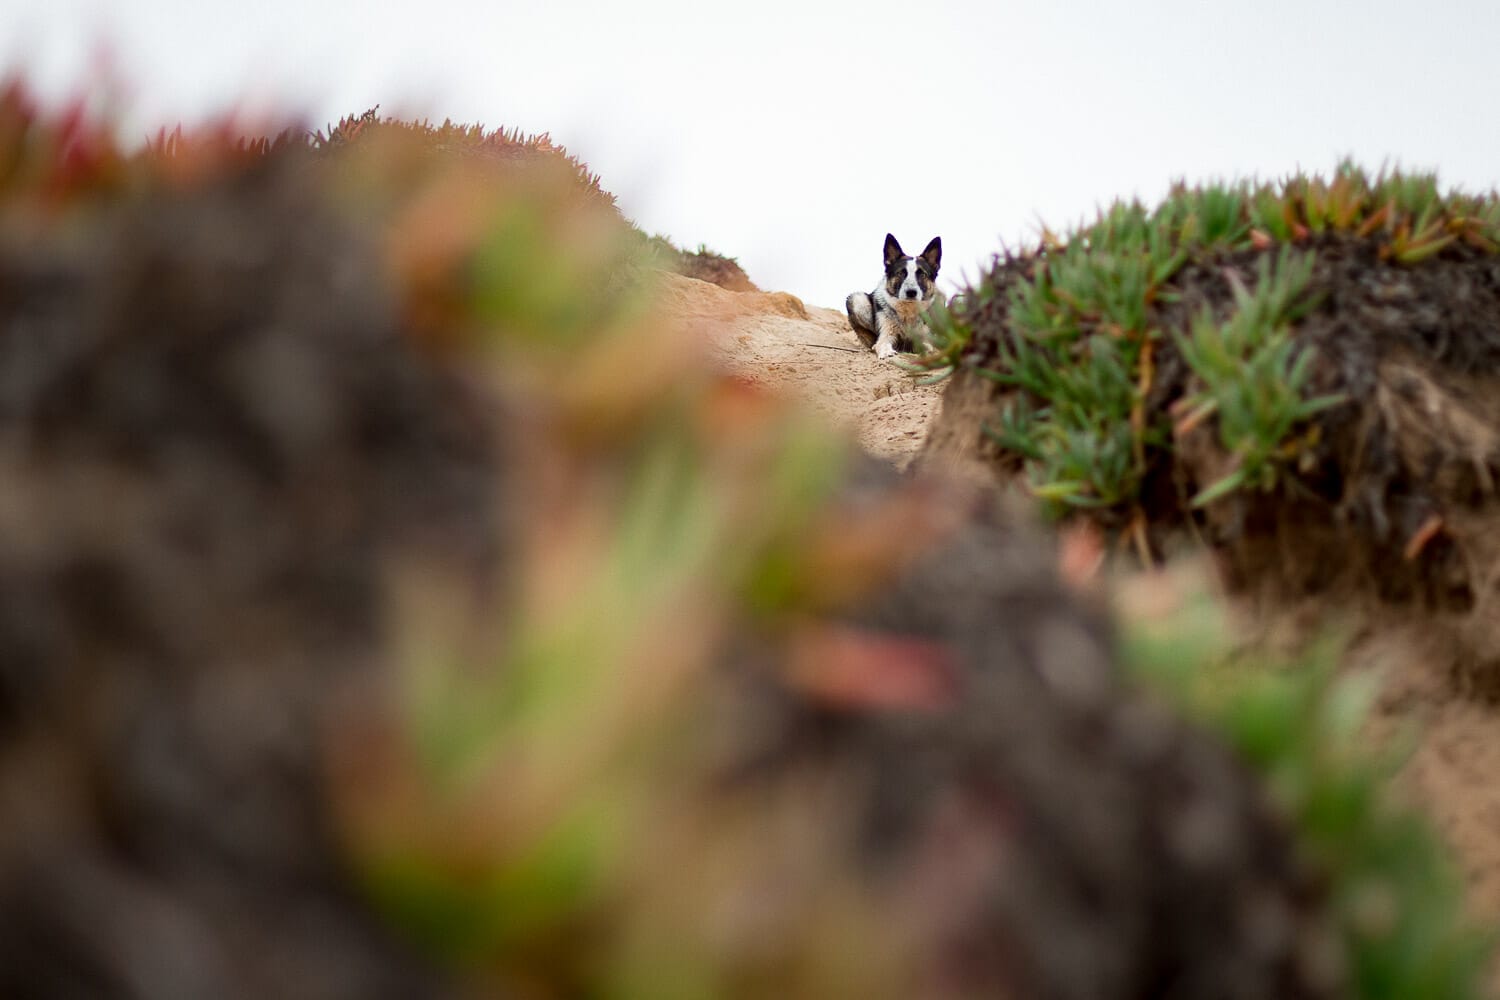 A dog peering through a gap between succulent plants on a sandy trail.